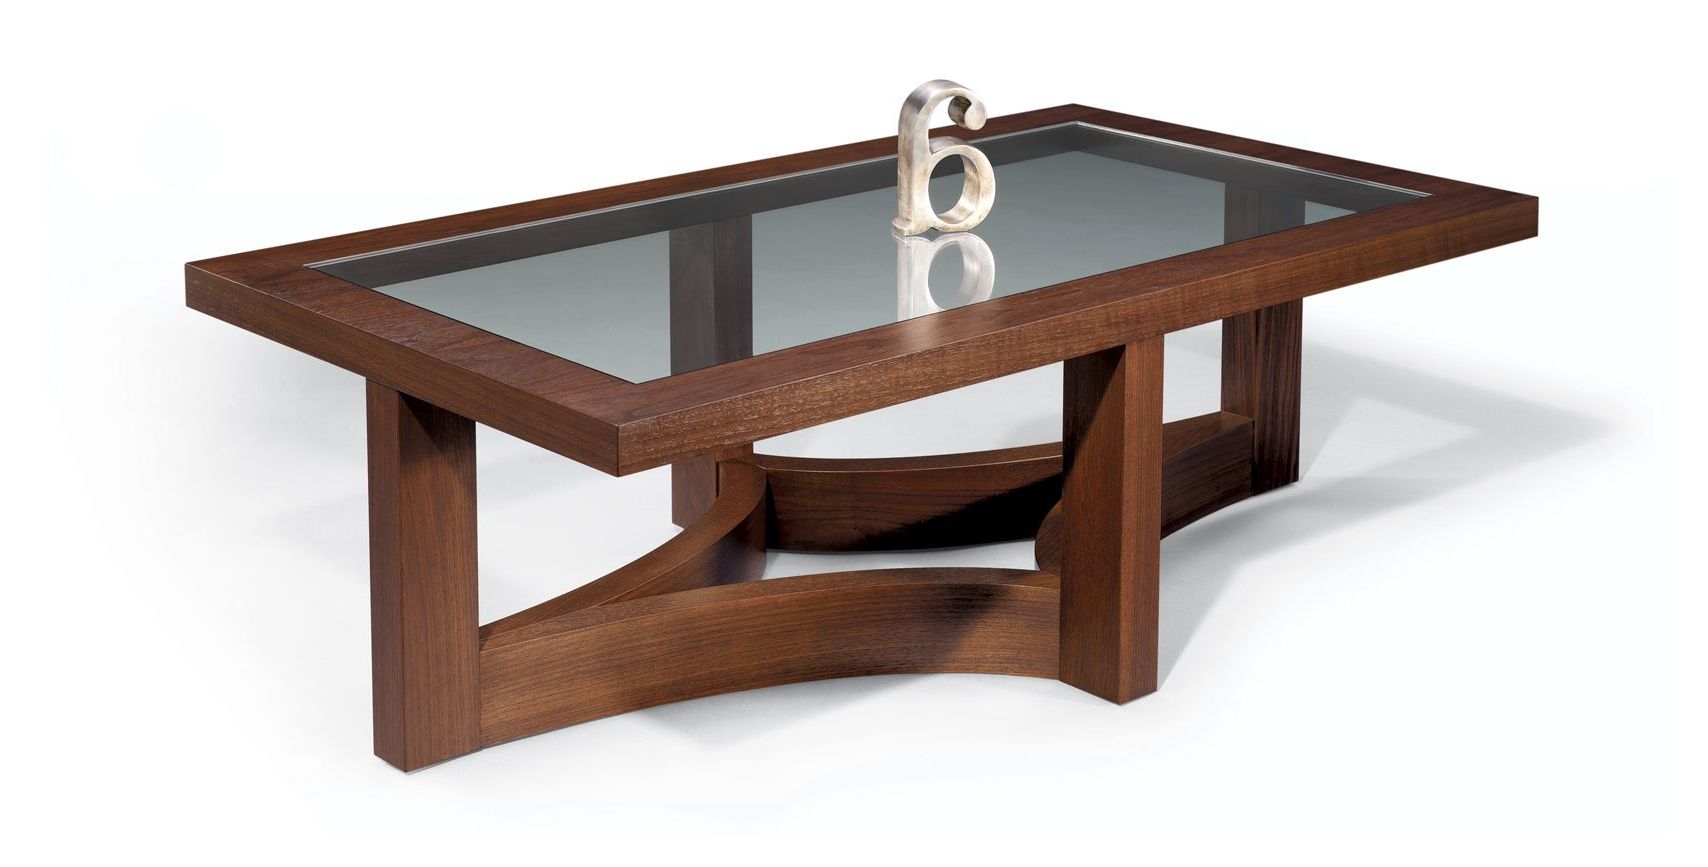 Widely Used Wood Rectangular Coffee Tables Throughout Nexus Cocktail Table Rectangular With Inset Glass Top (View 15 of 20)